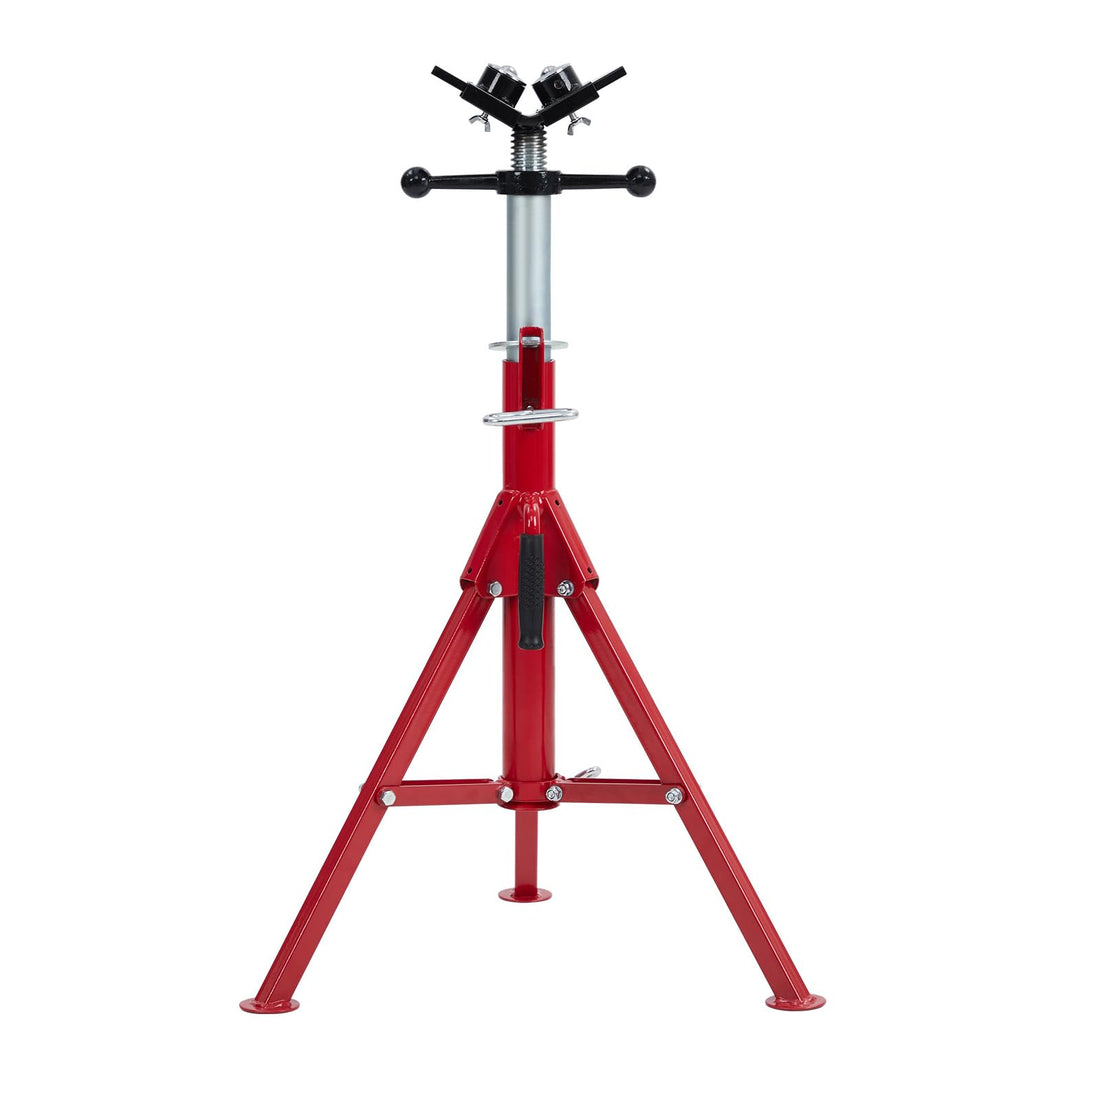 V-Head Pipe Jack Stand with 2-Ball 28-52 Inch Adjustable Height 2500 lb Load Capacity